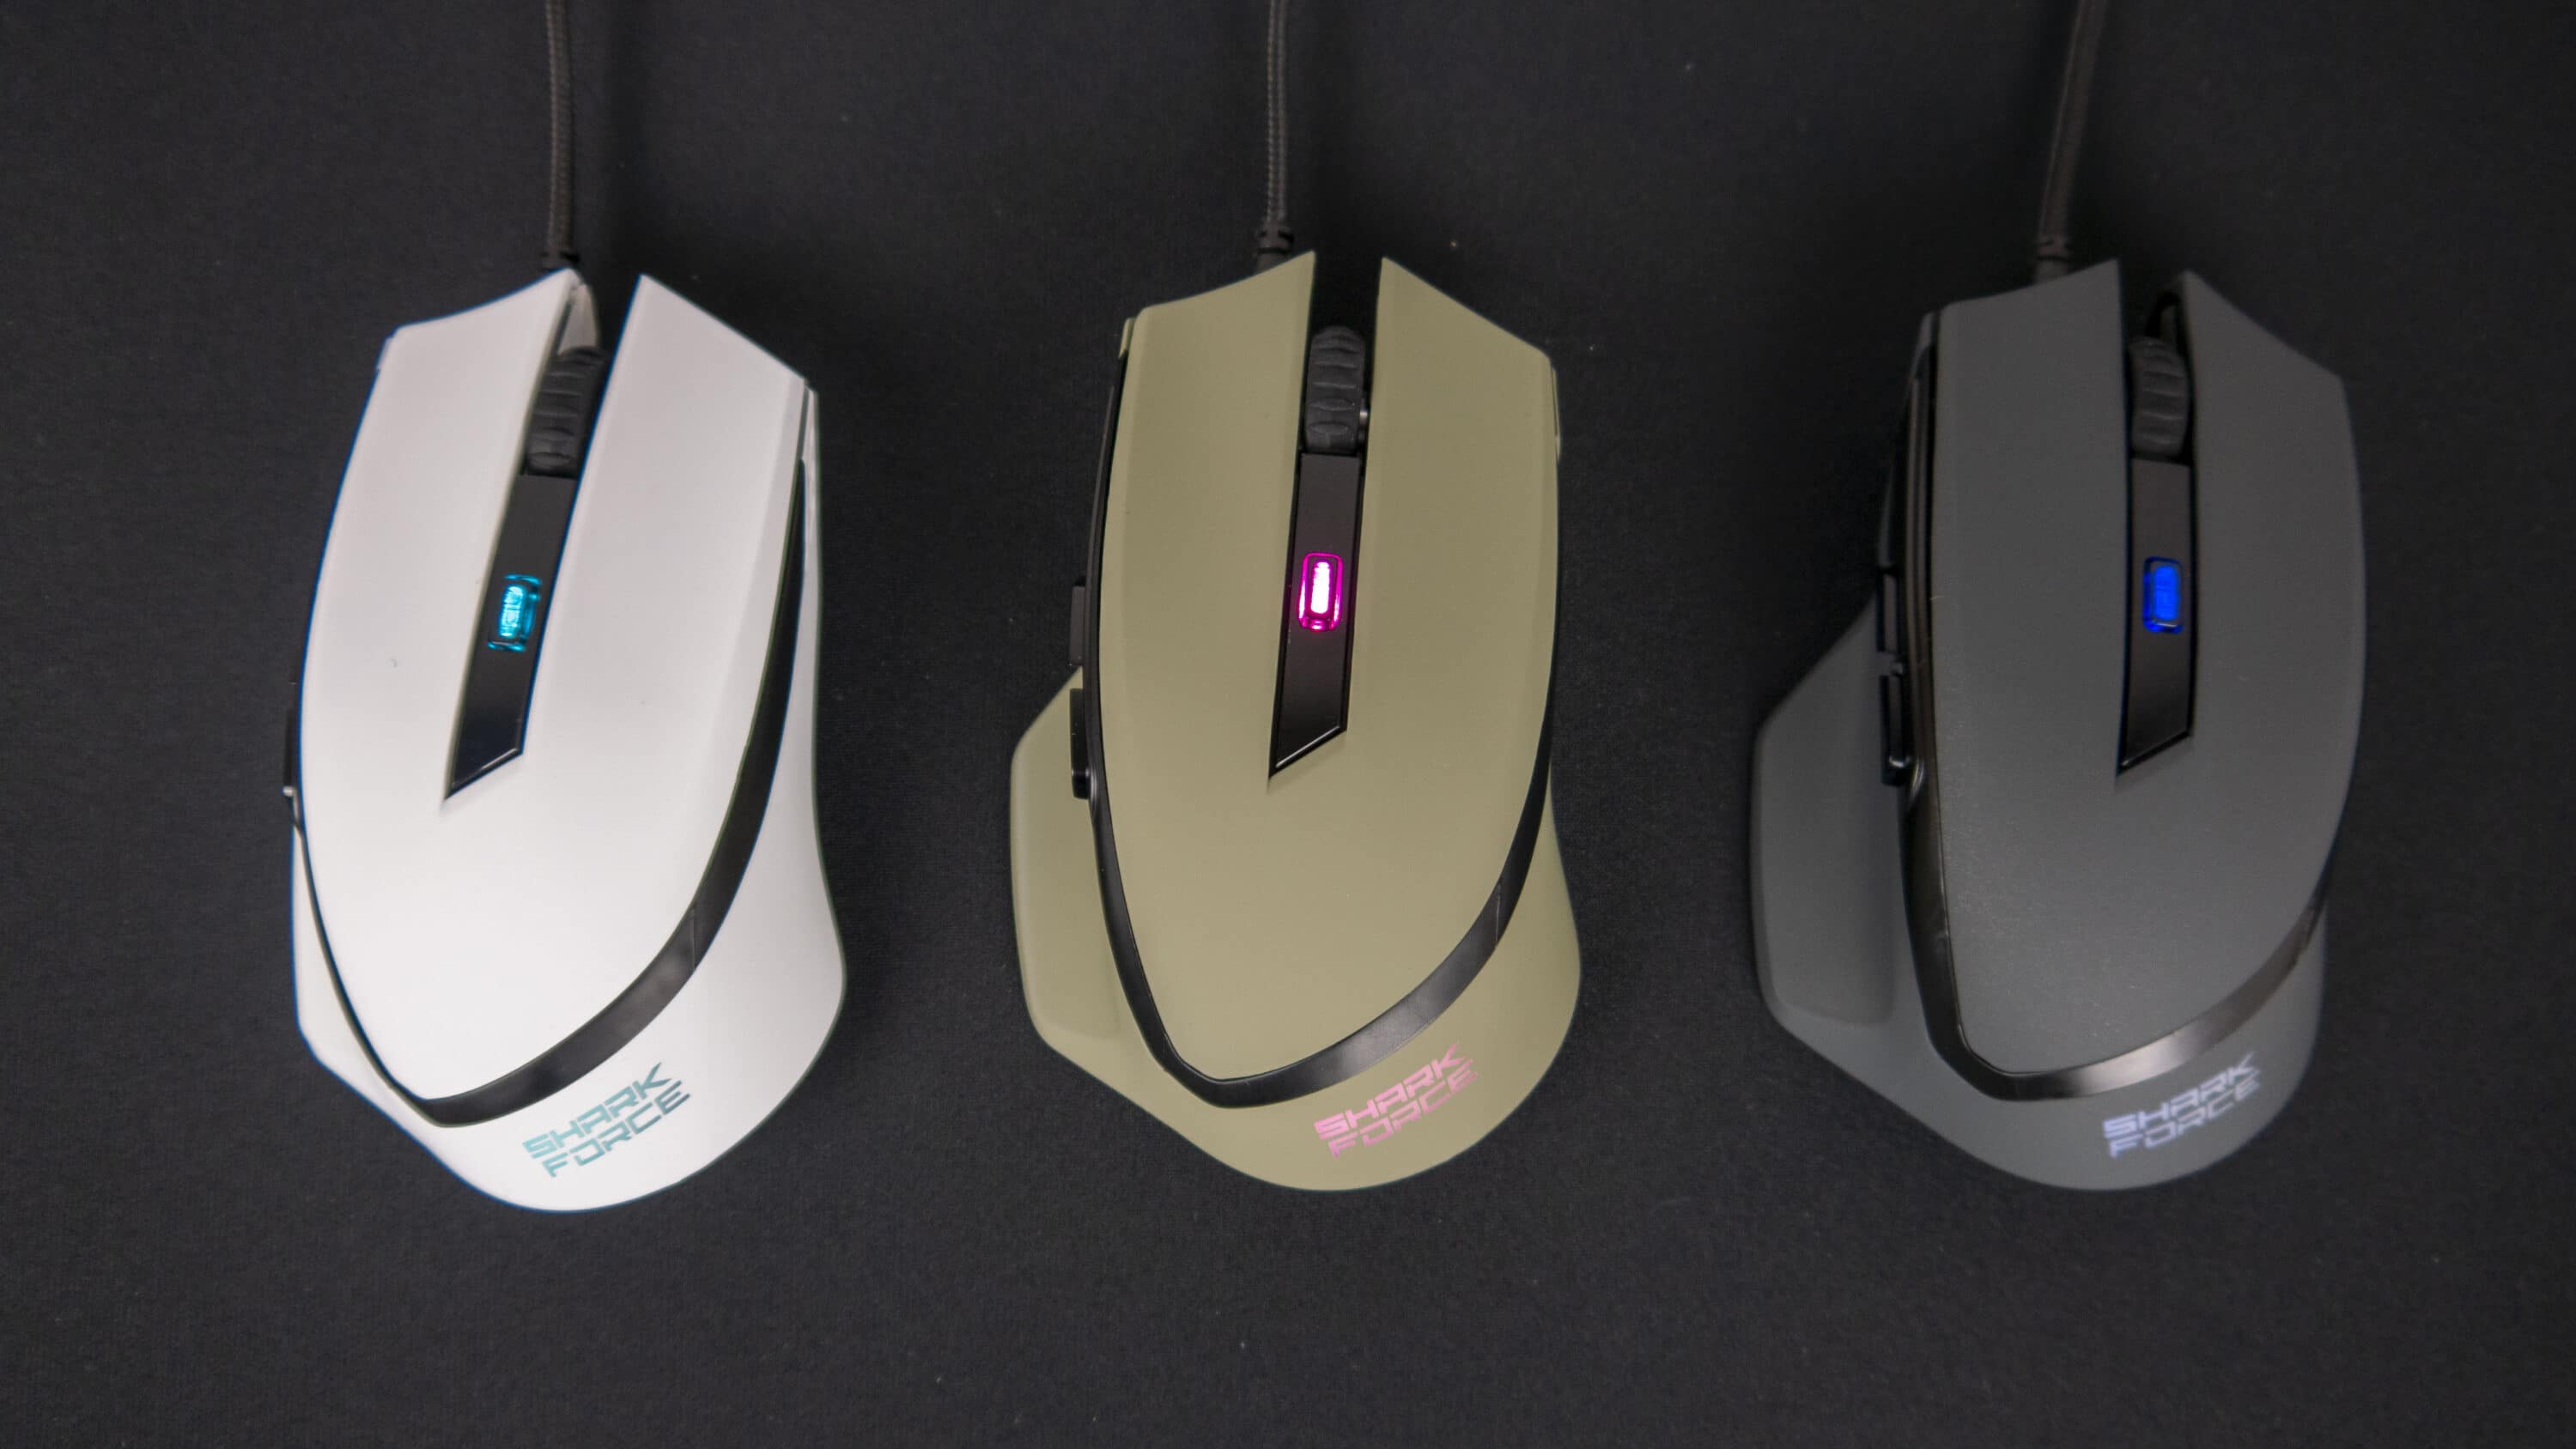 Cheap or low-priced? Shark gaming mouse ll in Sharkoon Force The test